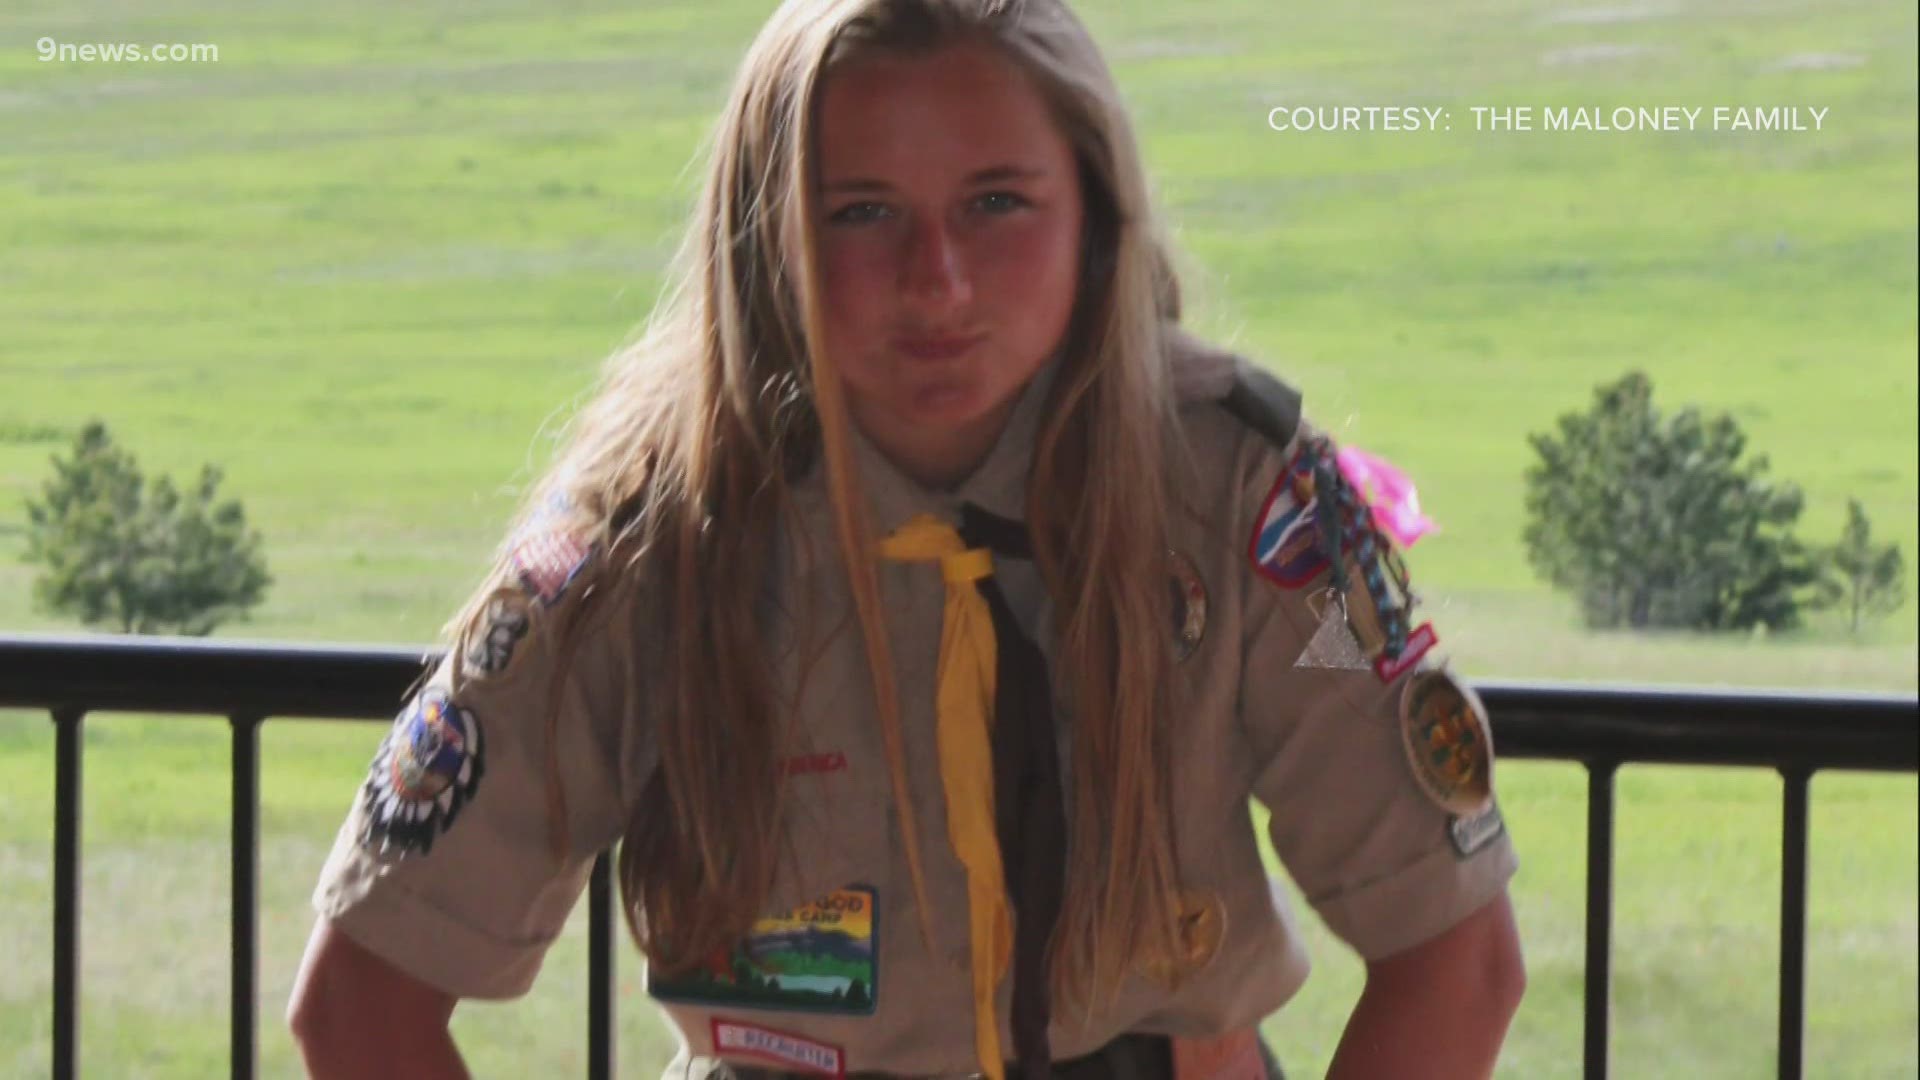 17-year-old Leah Jo Maloney rushed to aid a fellow hiker during a family vacation.